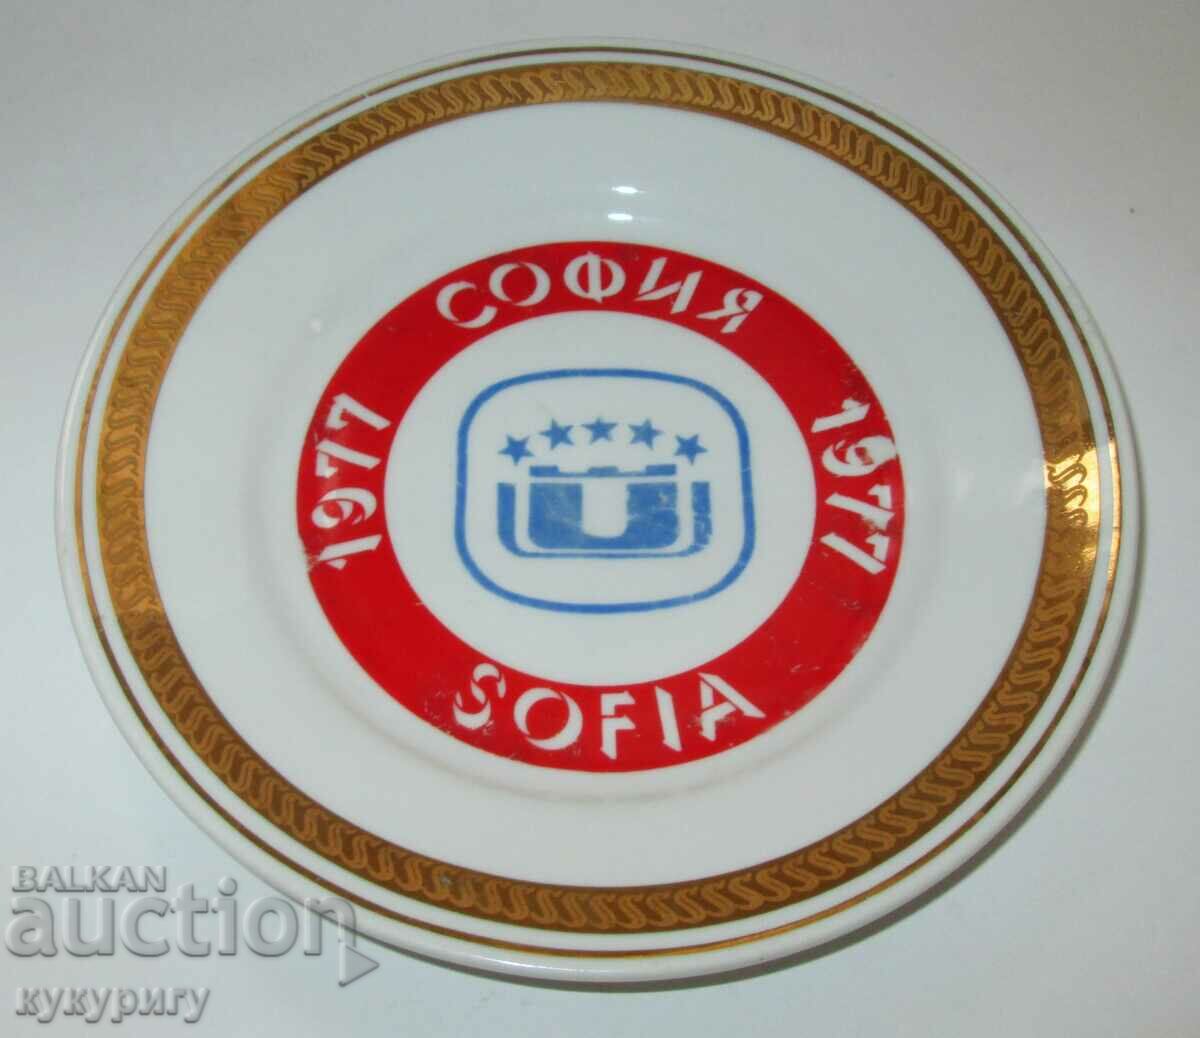 Old porcelain plate from the Universiade Sofia 1977.